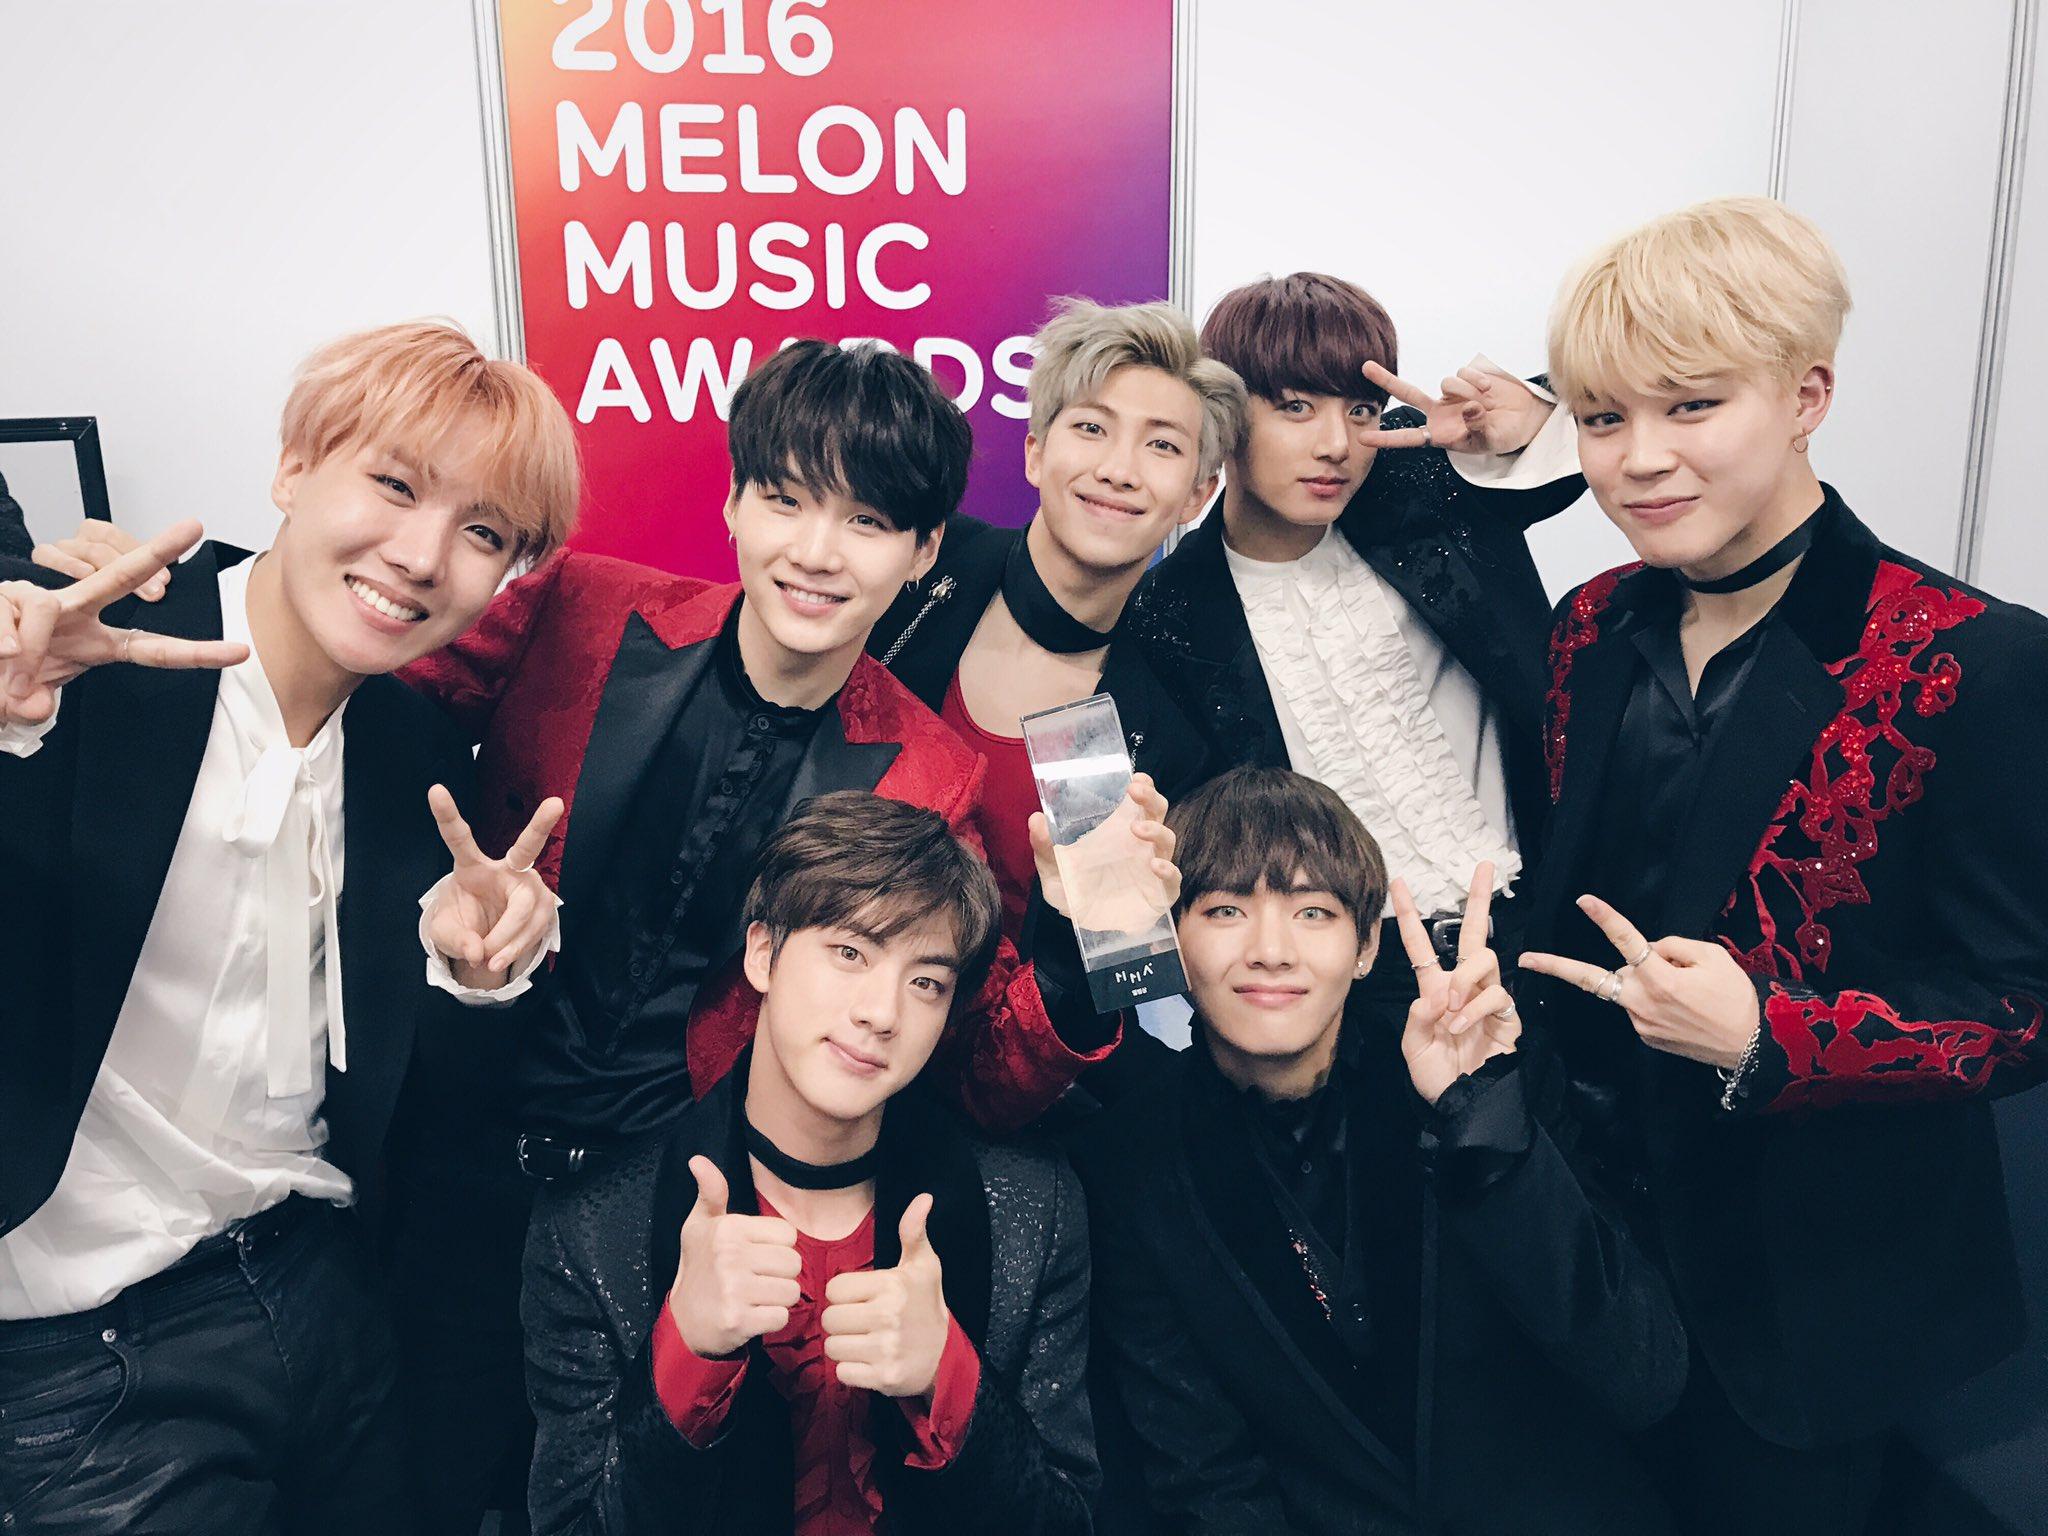 BTS Wins Best Album Of The Year At The 2016 Melon Music